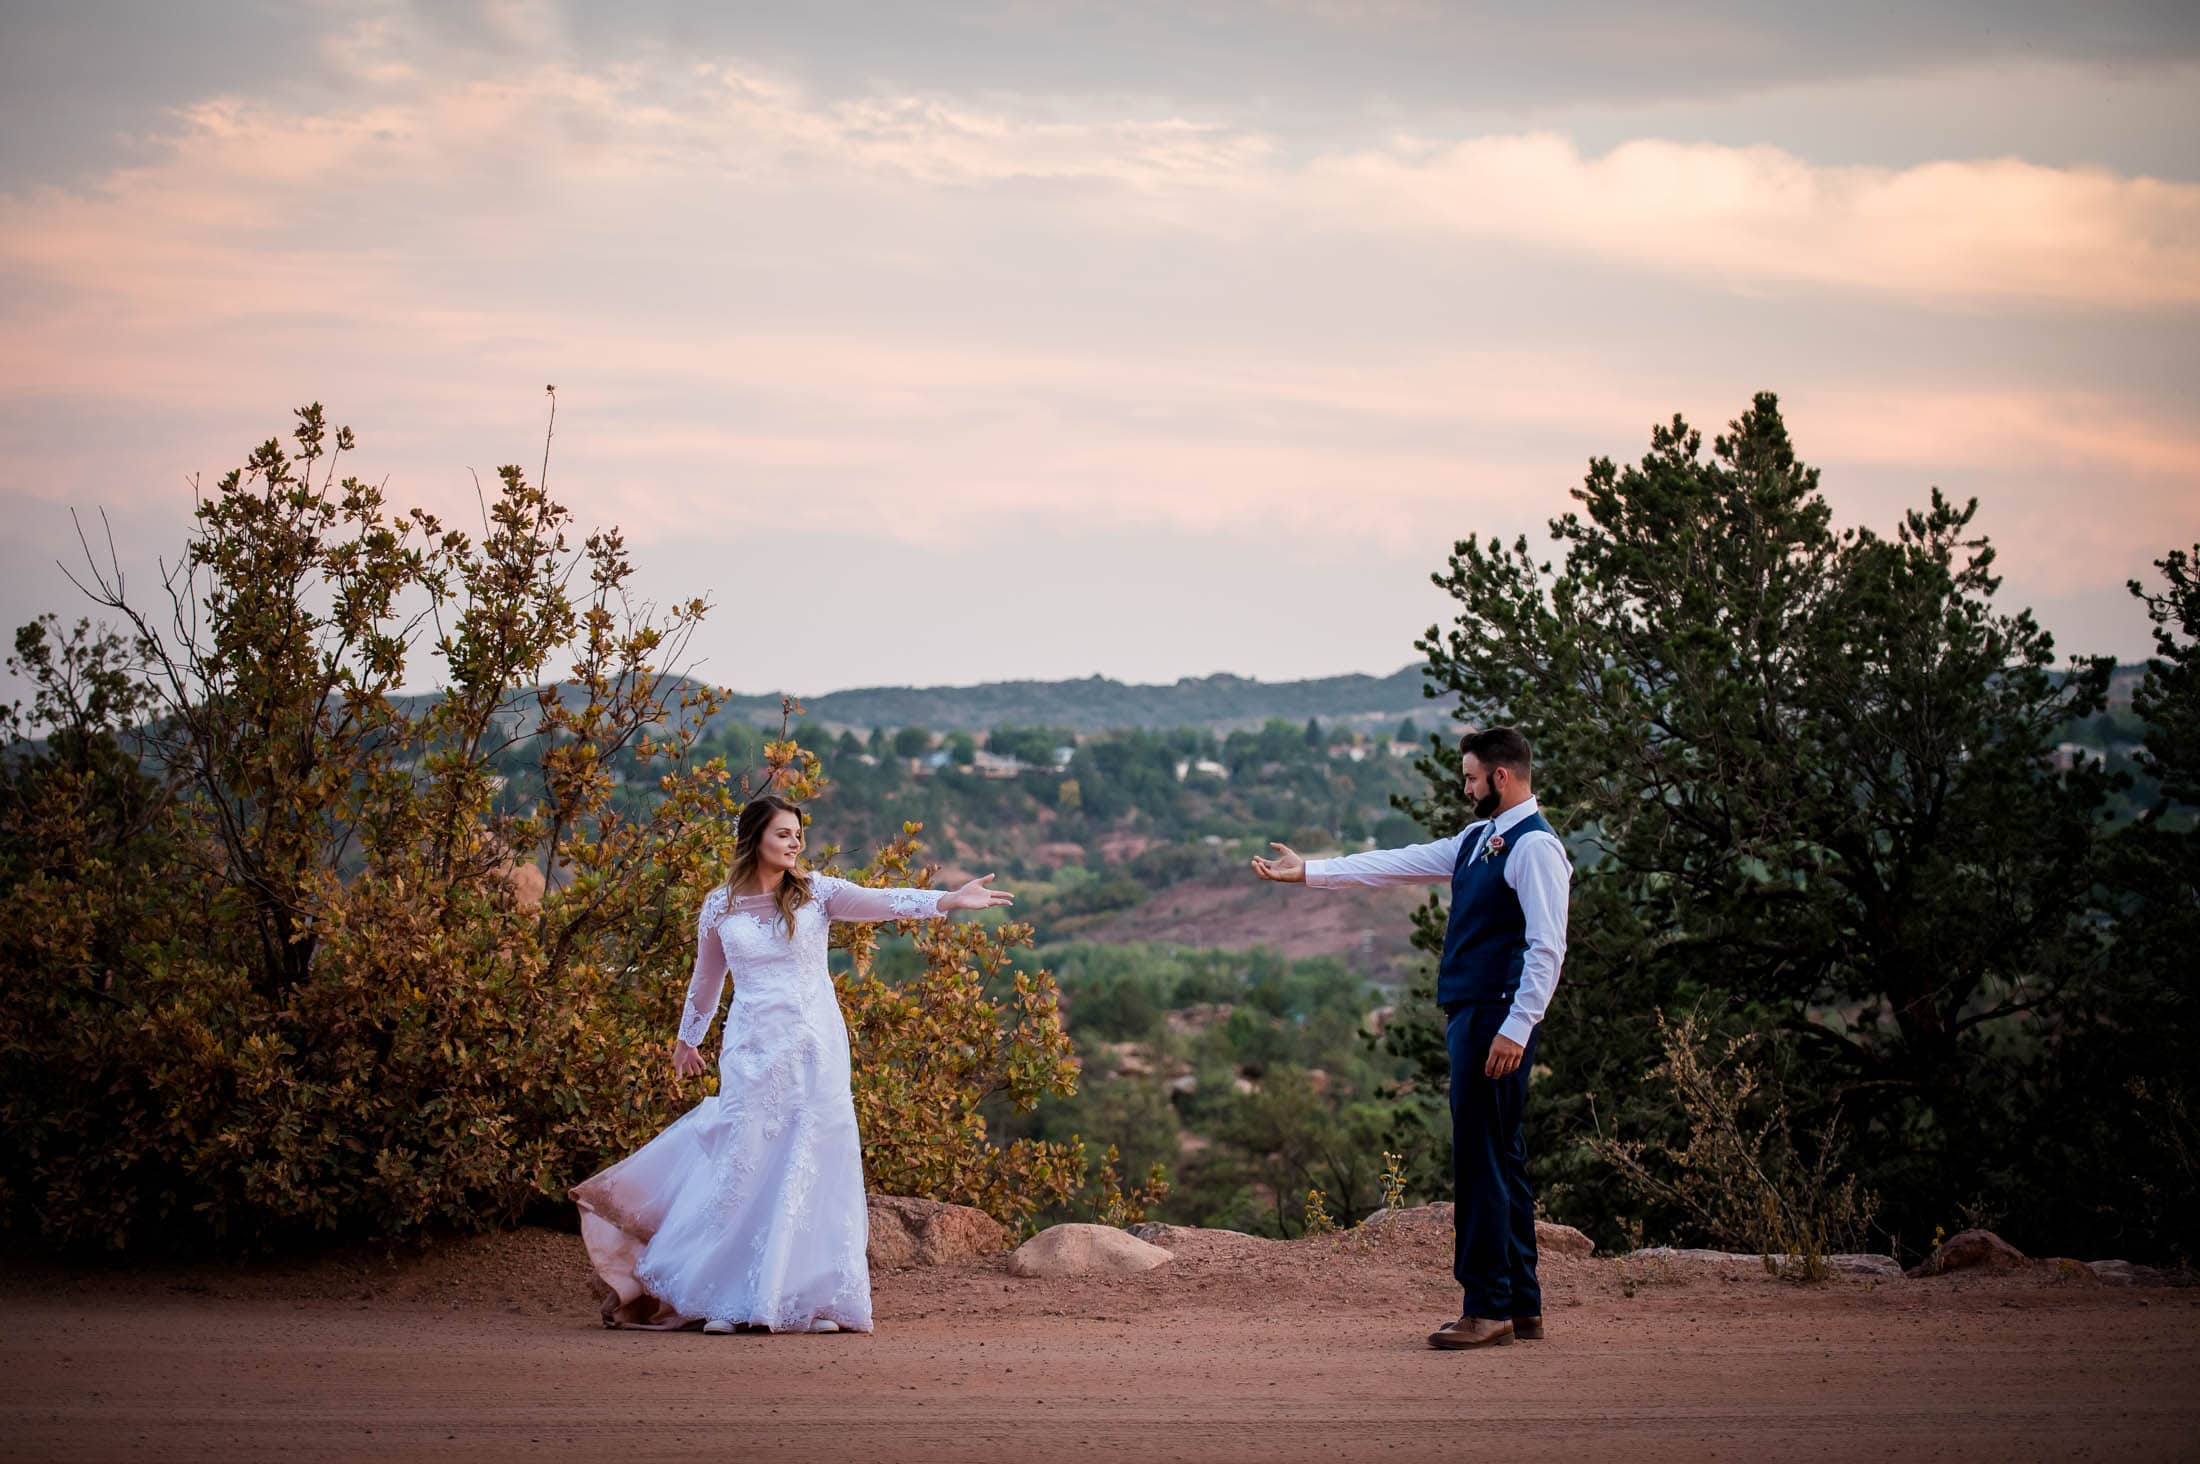 A marrying couple reach for each other against a rusty red dirt backdrop at sunset near Garden of the Gods Colorado at their elopement